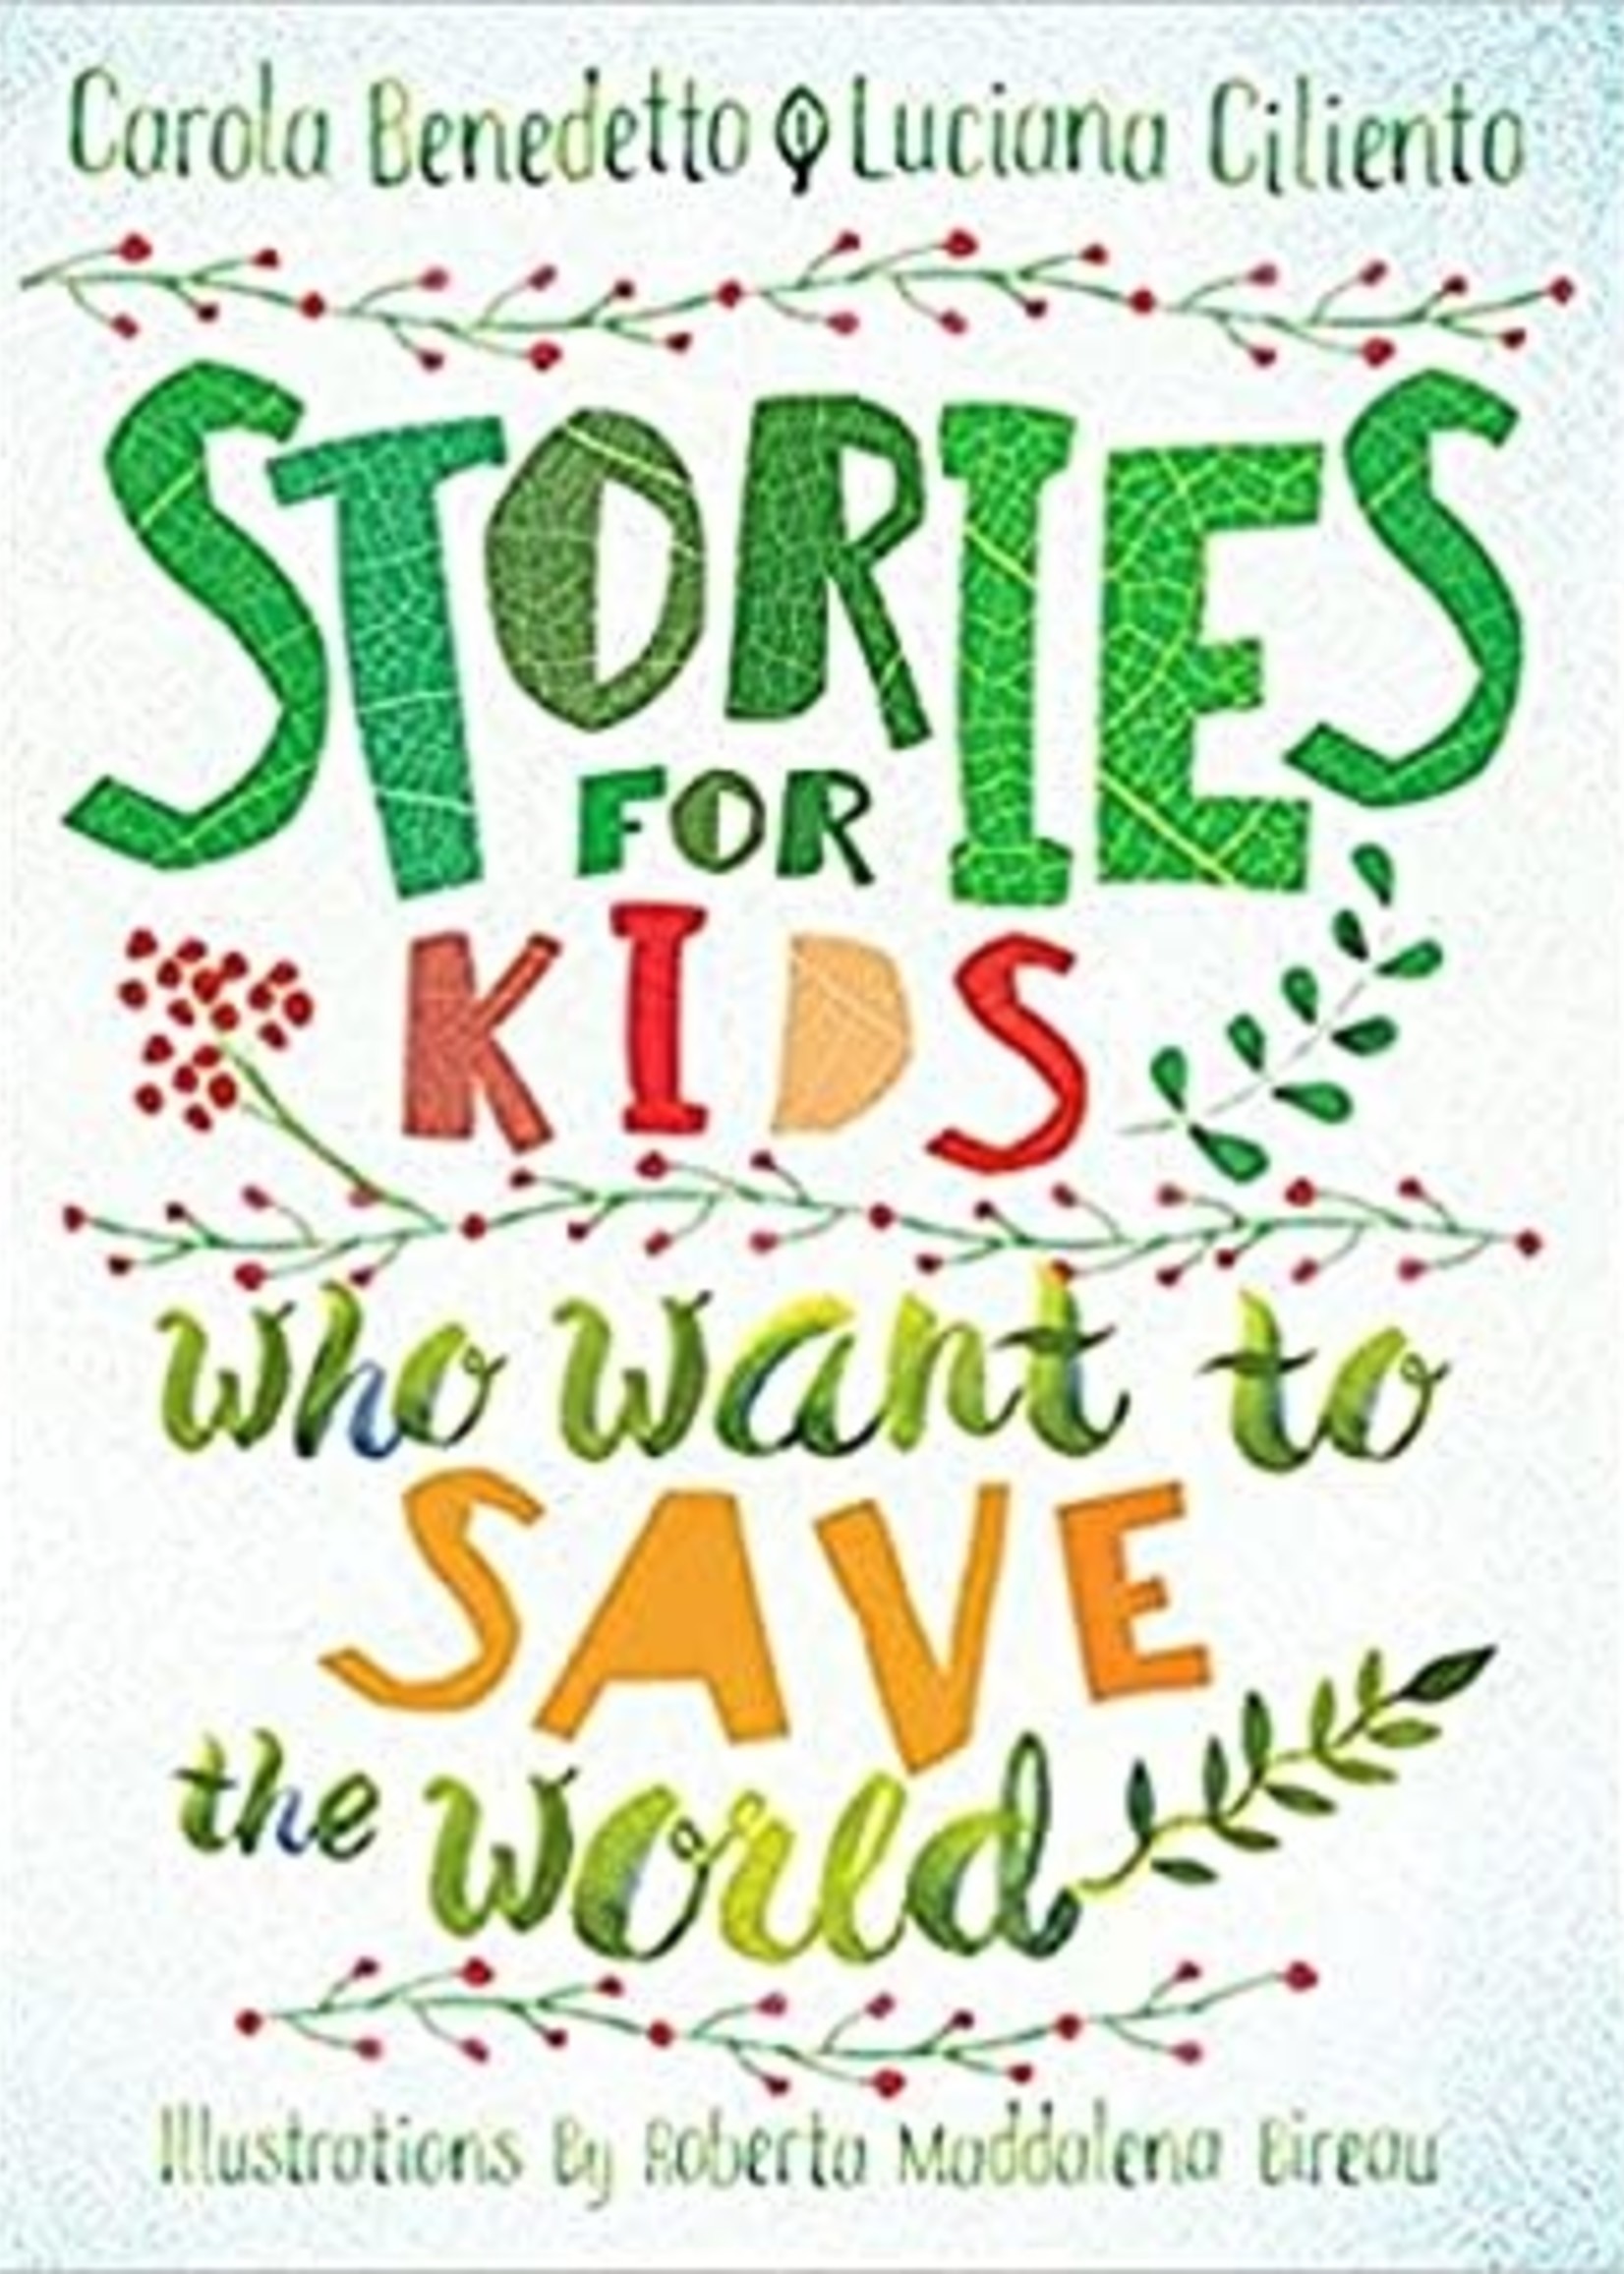 Stories for Kids Who Want to Save the World by Carola Benedetto, Luciana Ciliento, Roberta Maddalena Bireau